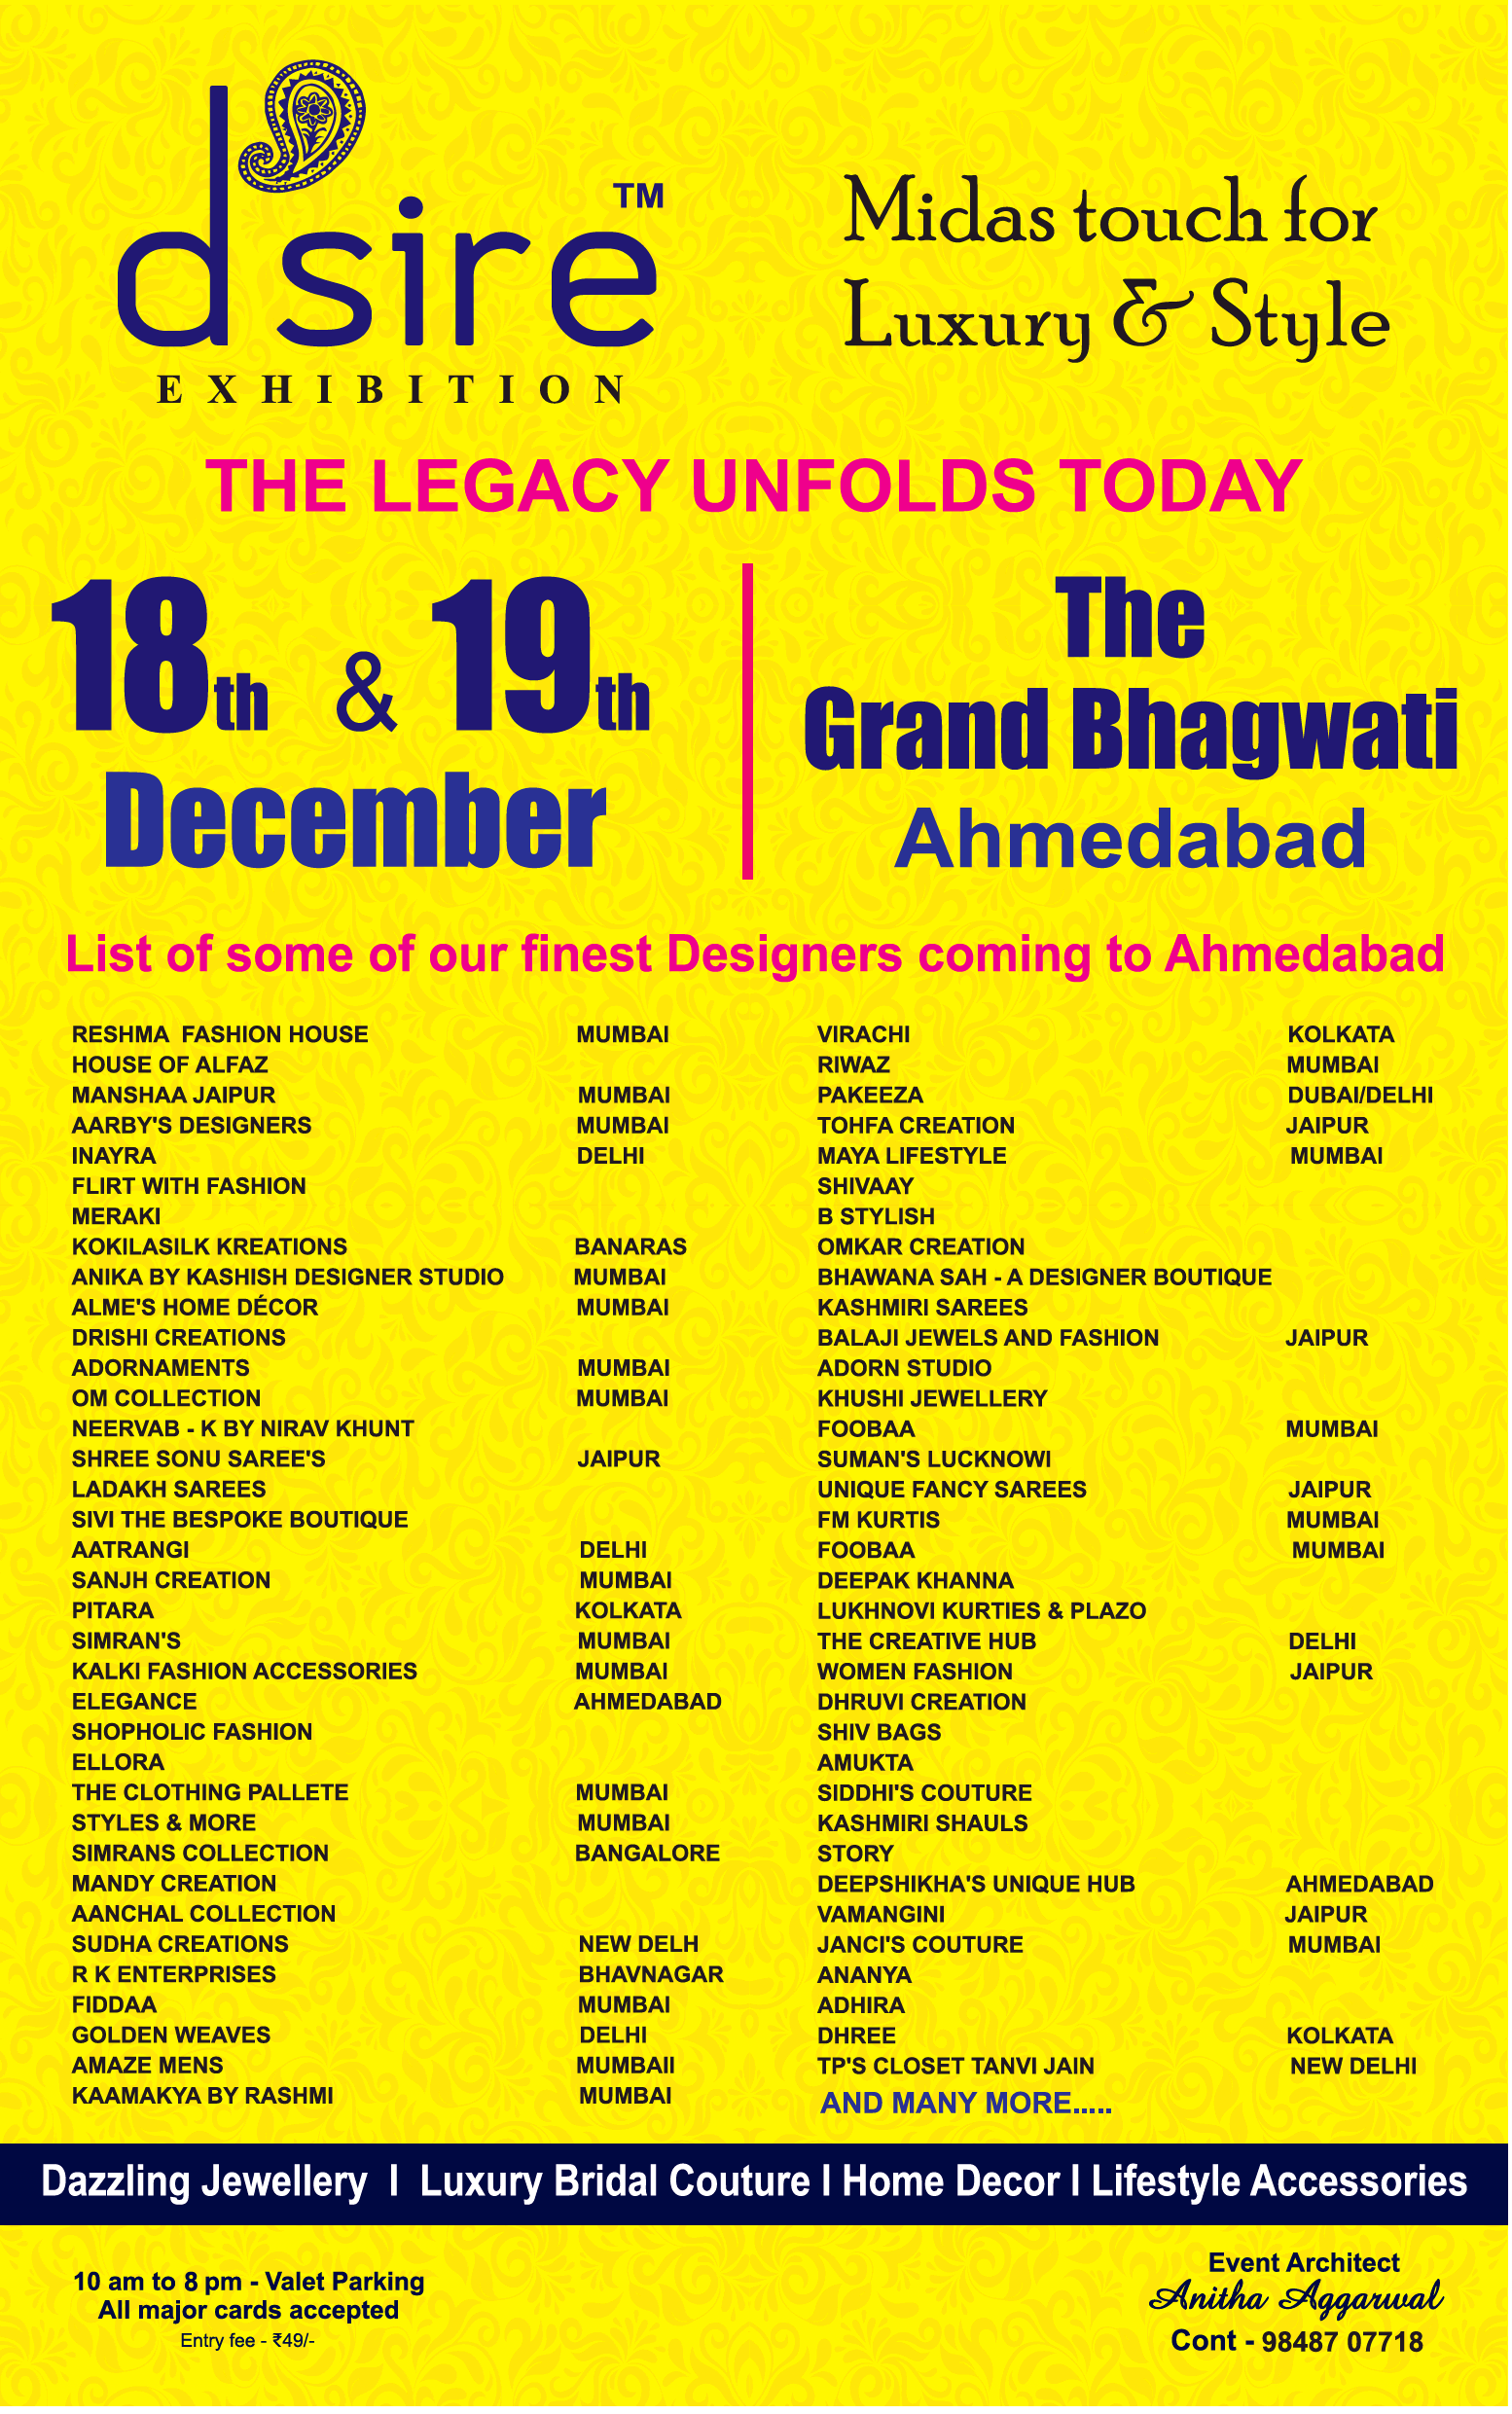 dsire-exhibition-the-legacy-unfolds-today-ad-in-times-of-india